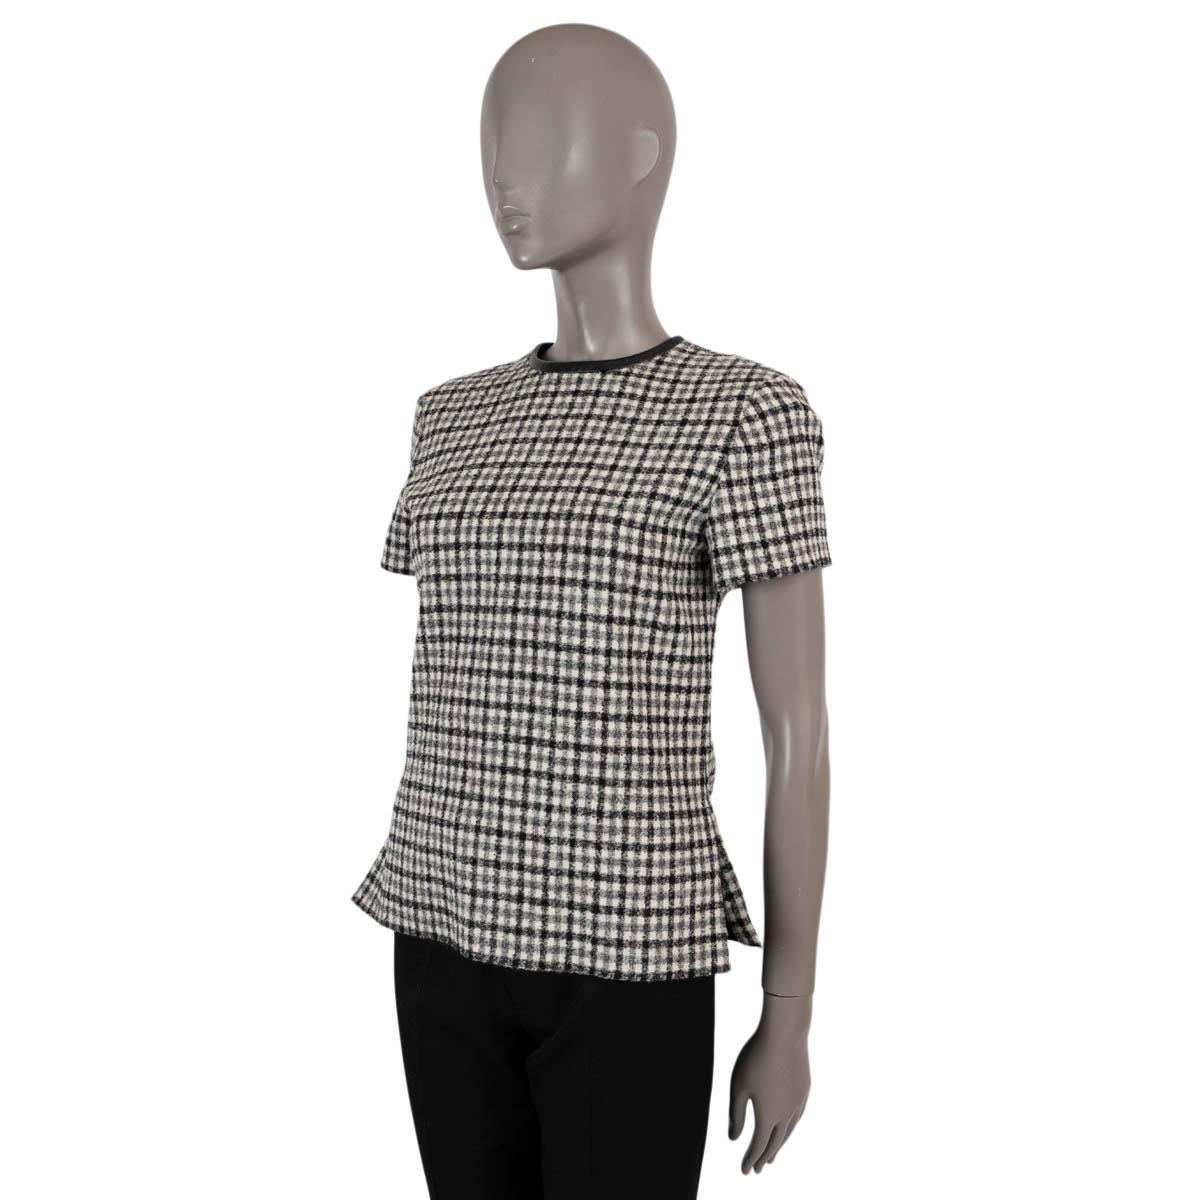 100% authentic Louis Vuitton leather trim check shirt in black, white and gray wool (100%- please note the content tag is missing). Opens withe a black zipper on the back. Lined in silk (100%). Has been worn and is in excellent condition.